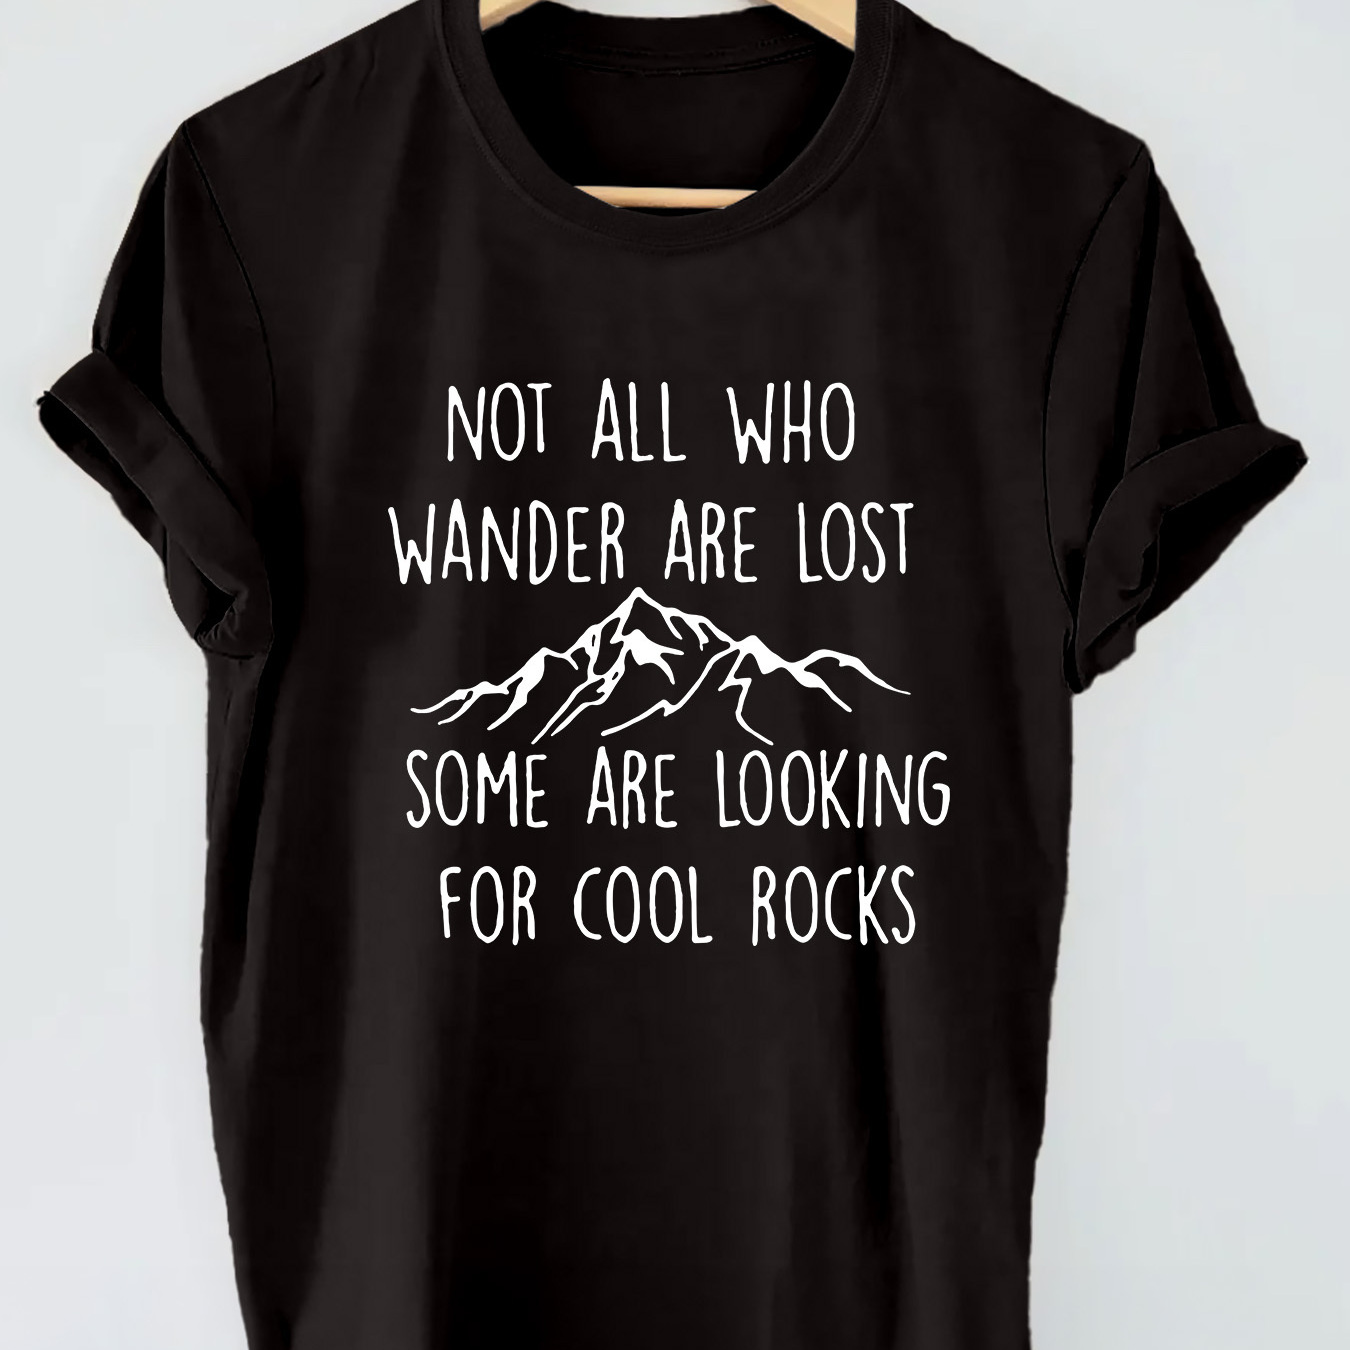 

Not All Who Wander Are Lost Print T-shirt, Short Sleeve Crew Neck Casual Top For Summer & Spring, Women's Clothing